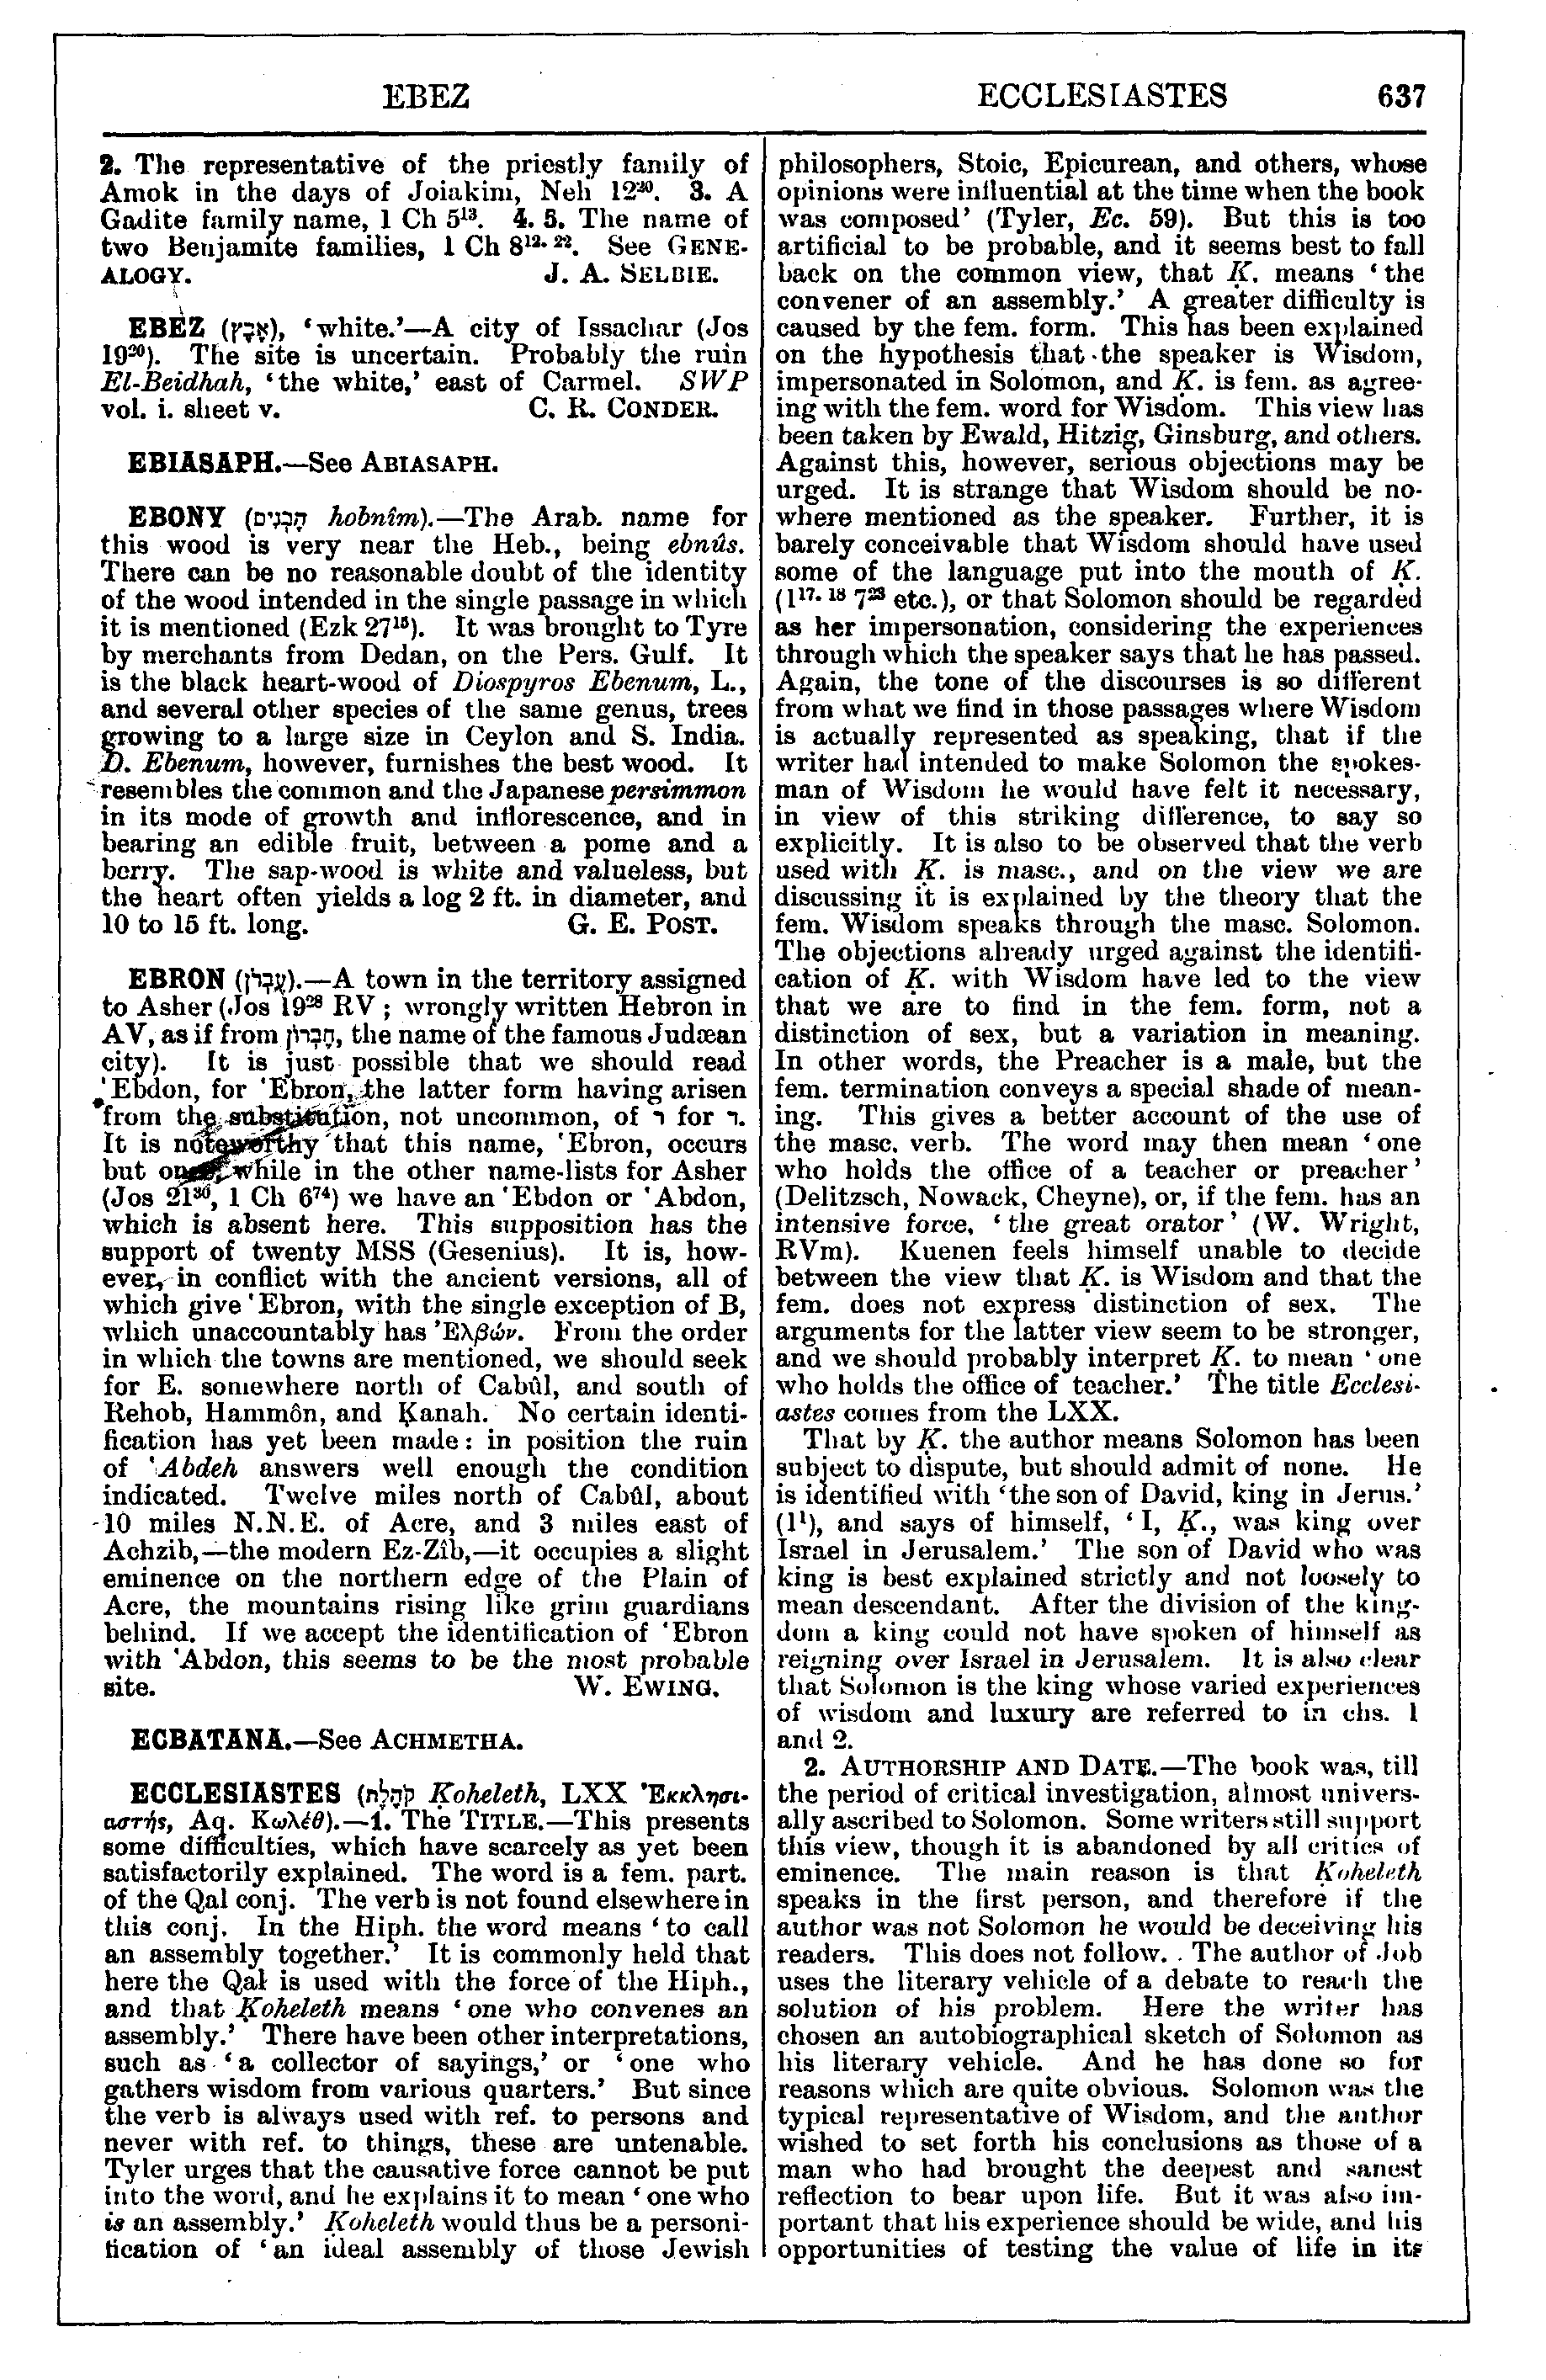 Image of page 637